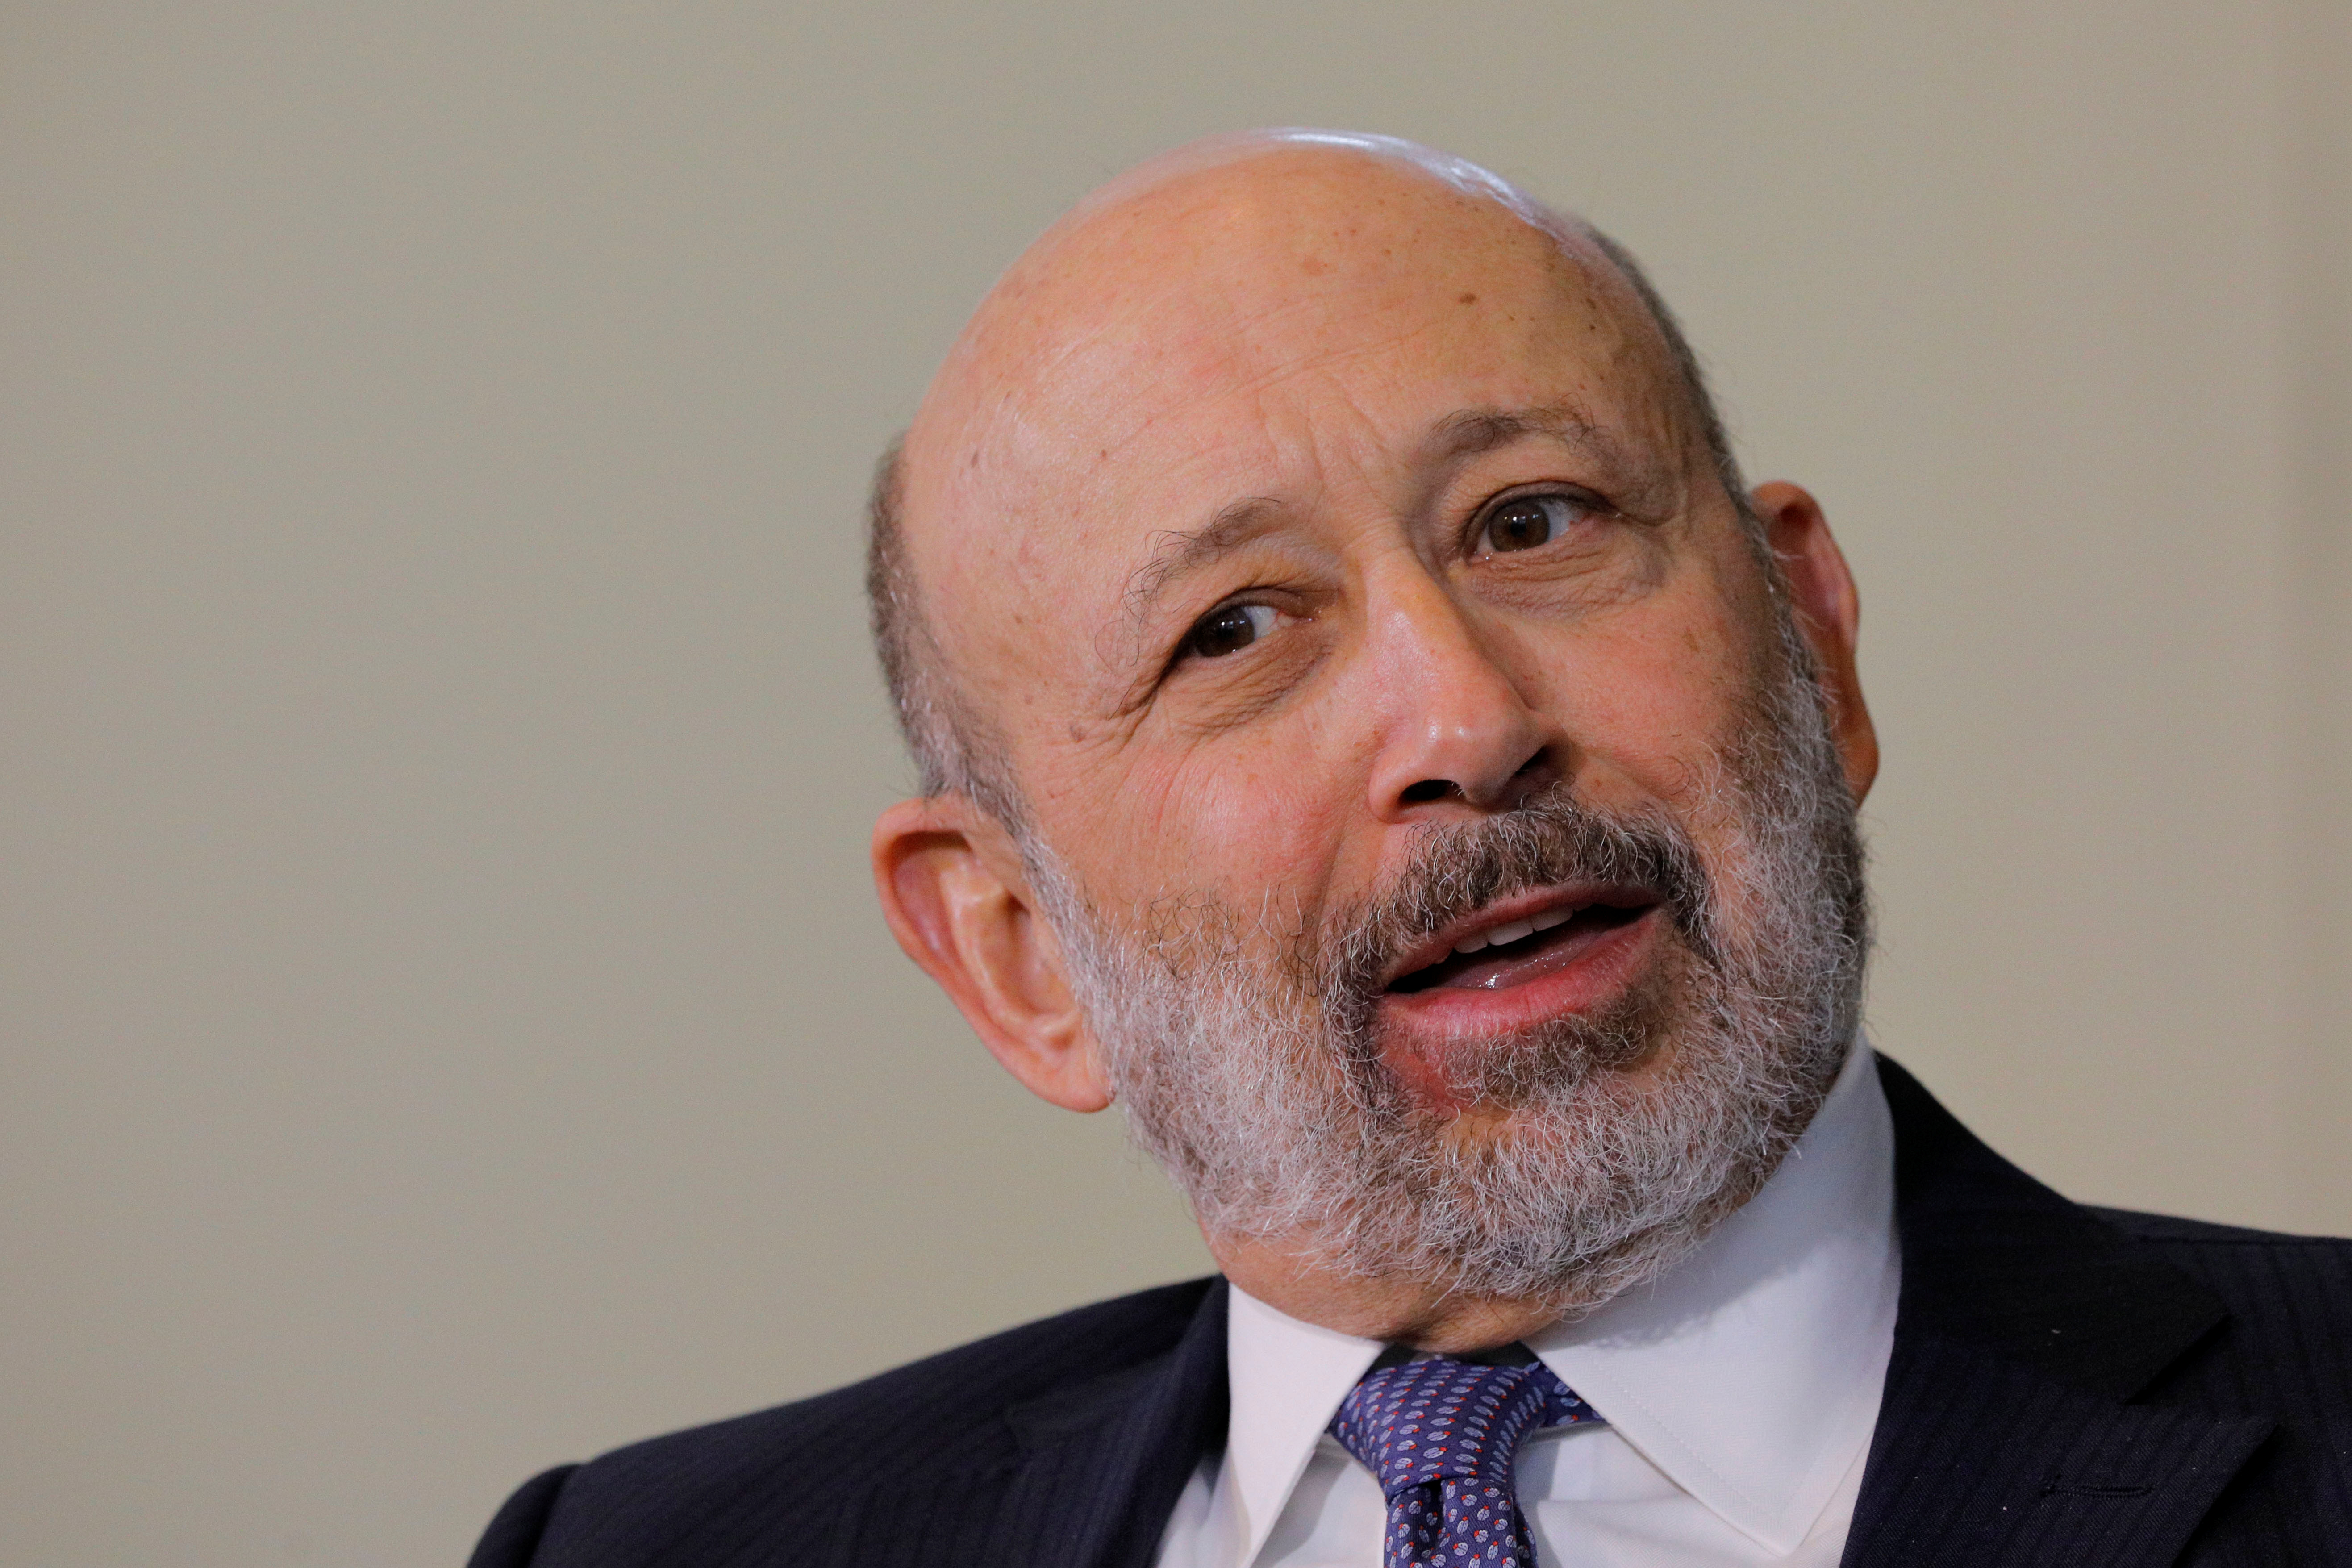 Blankfein, CEO of Goldman Sachs, speaks at the Boston College Chief Executives Club luncheon in Boston